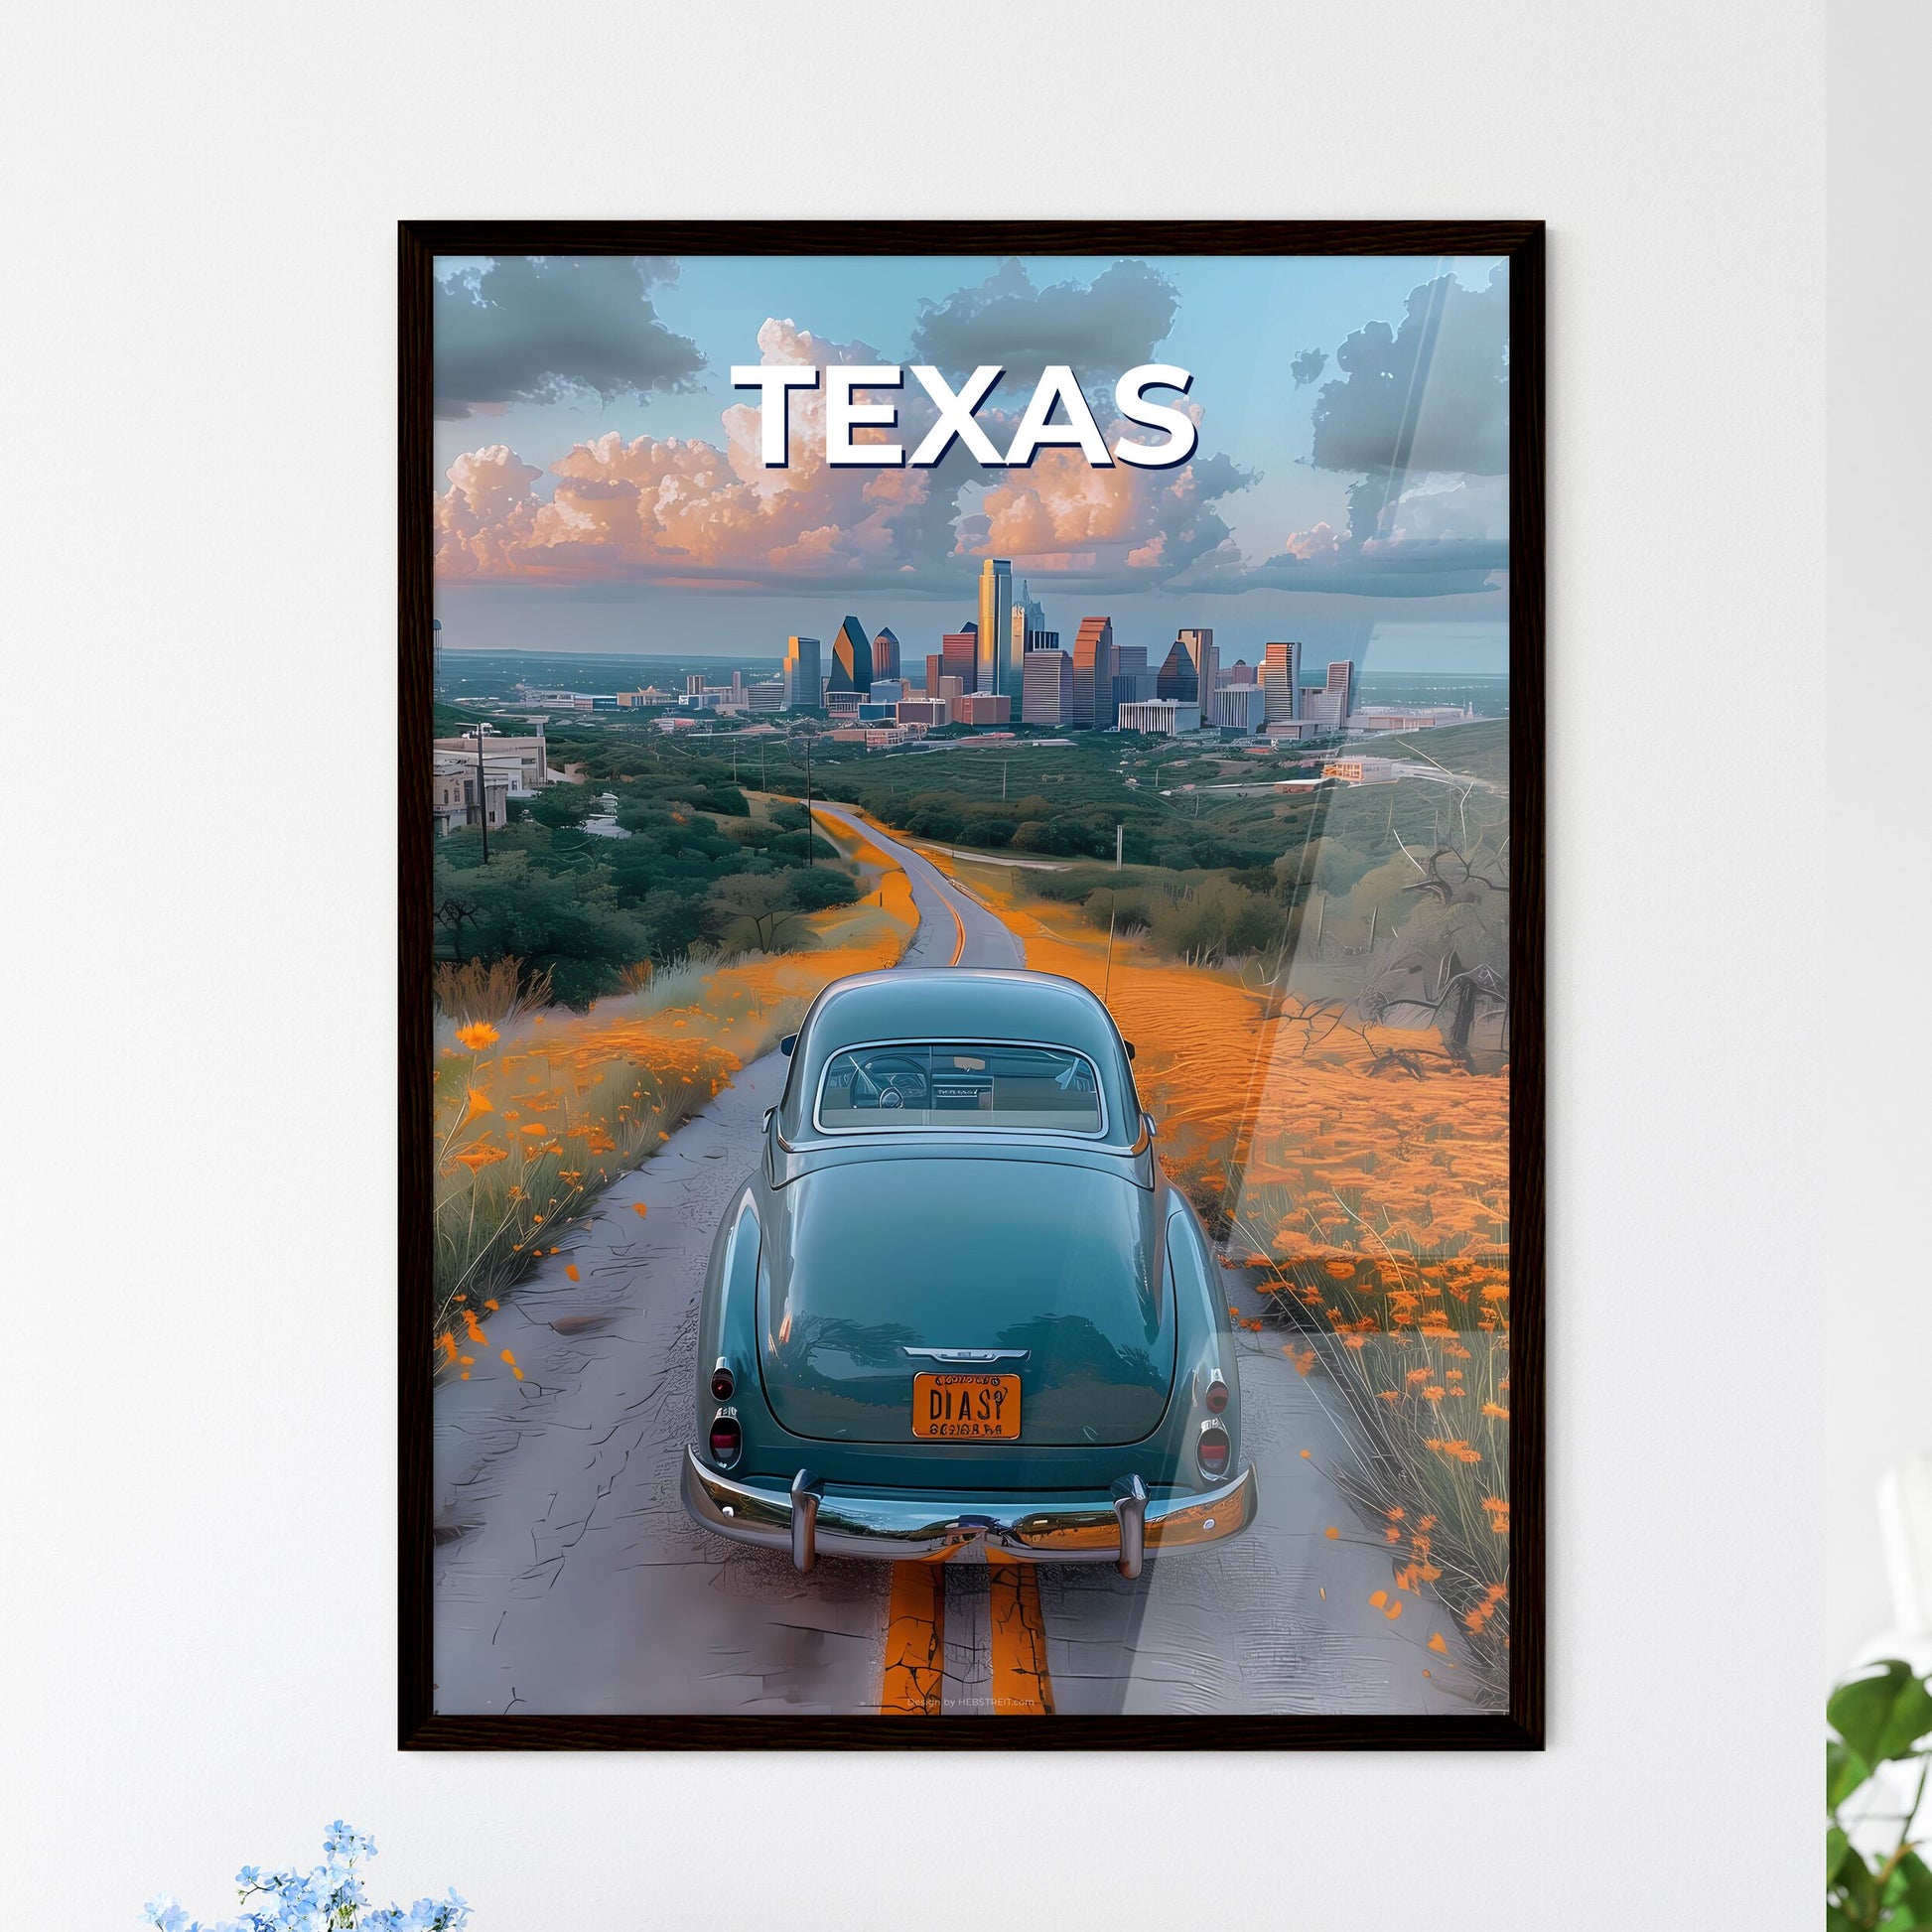 Grunge painting of a car on a road with orange flowers in Texas, USA, with a city in the background